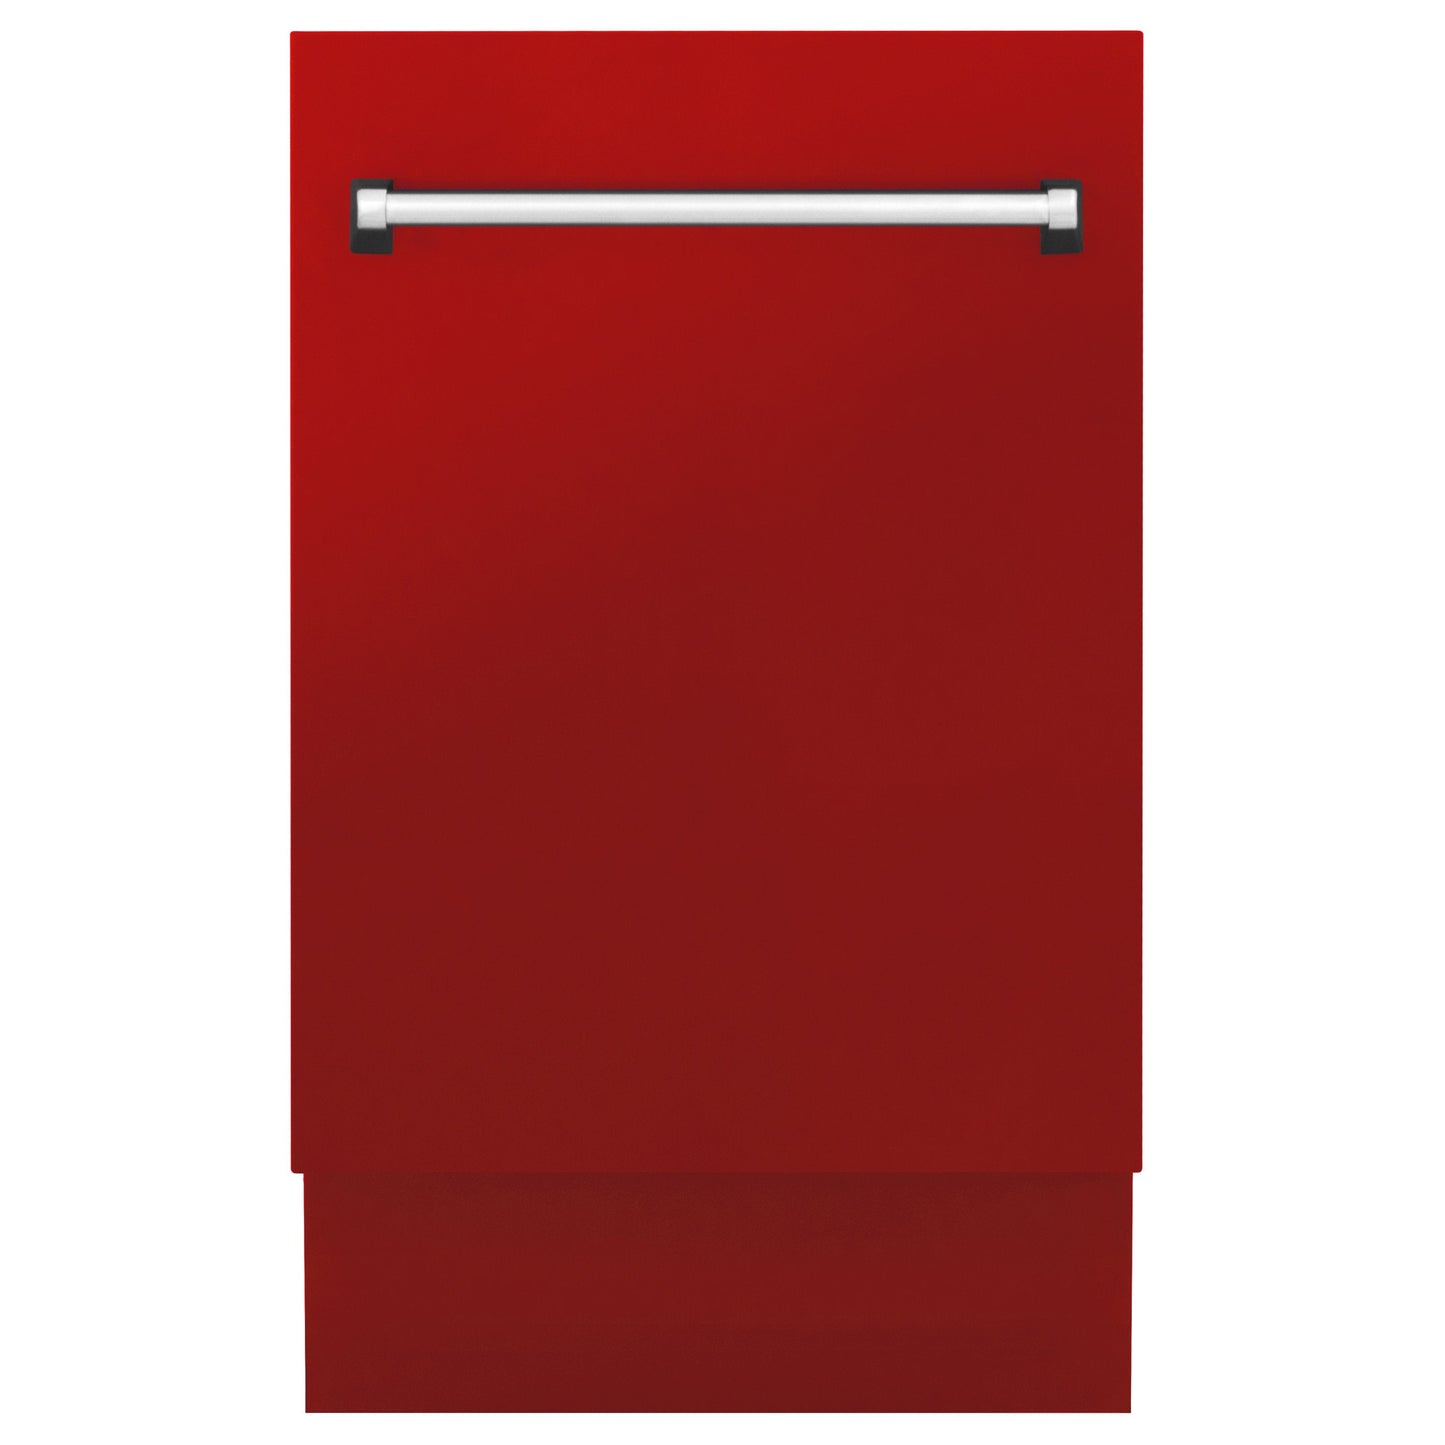 ZLINE 18 in. Top Control Tall Dishwasher in Red Matte with 3rd Rack